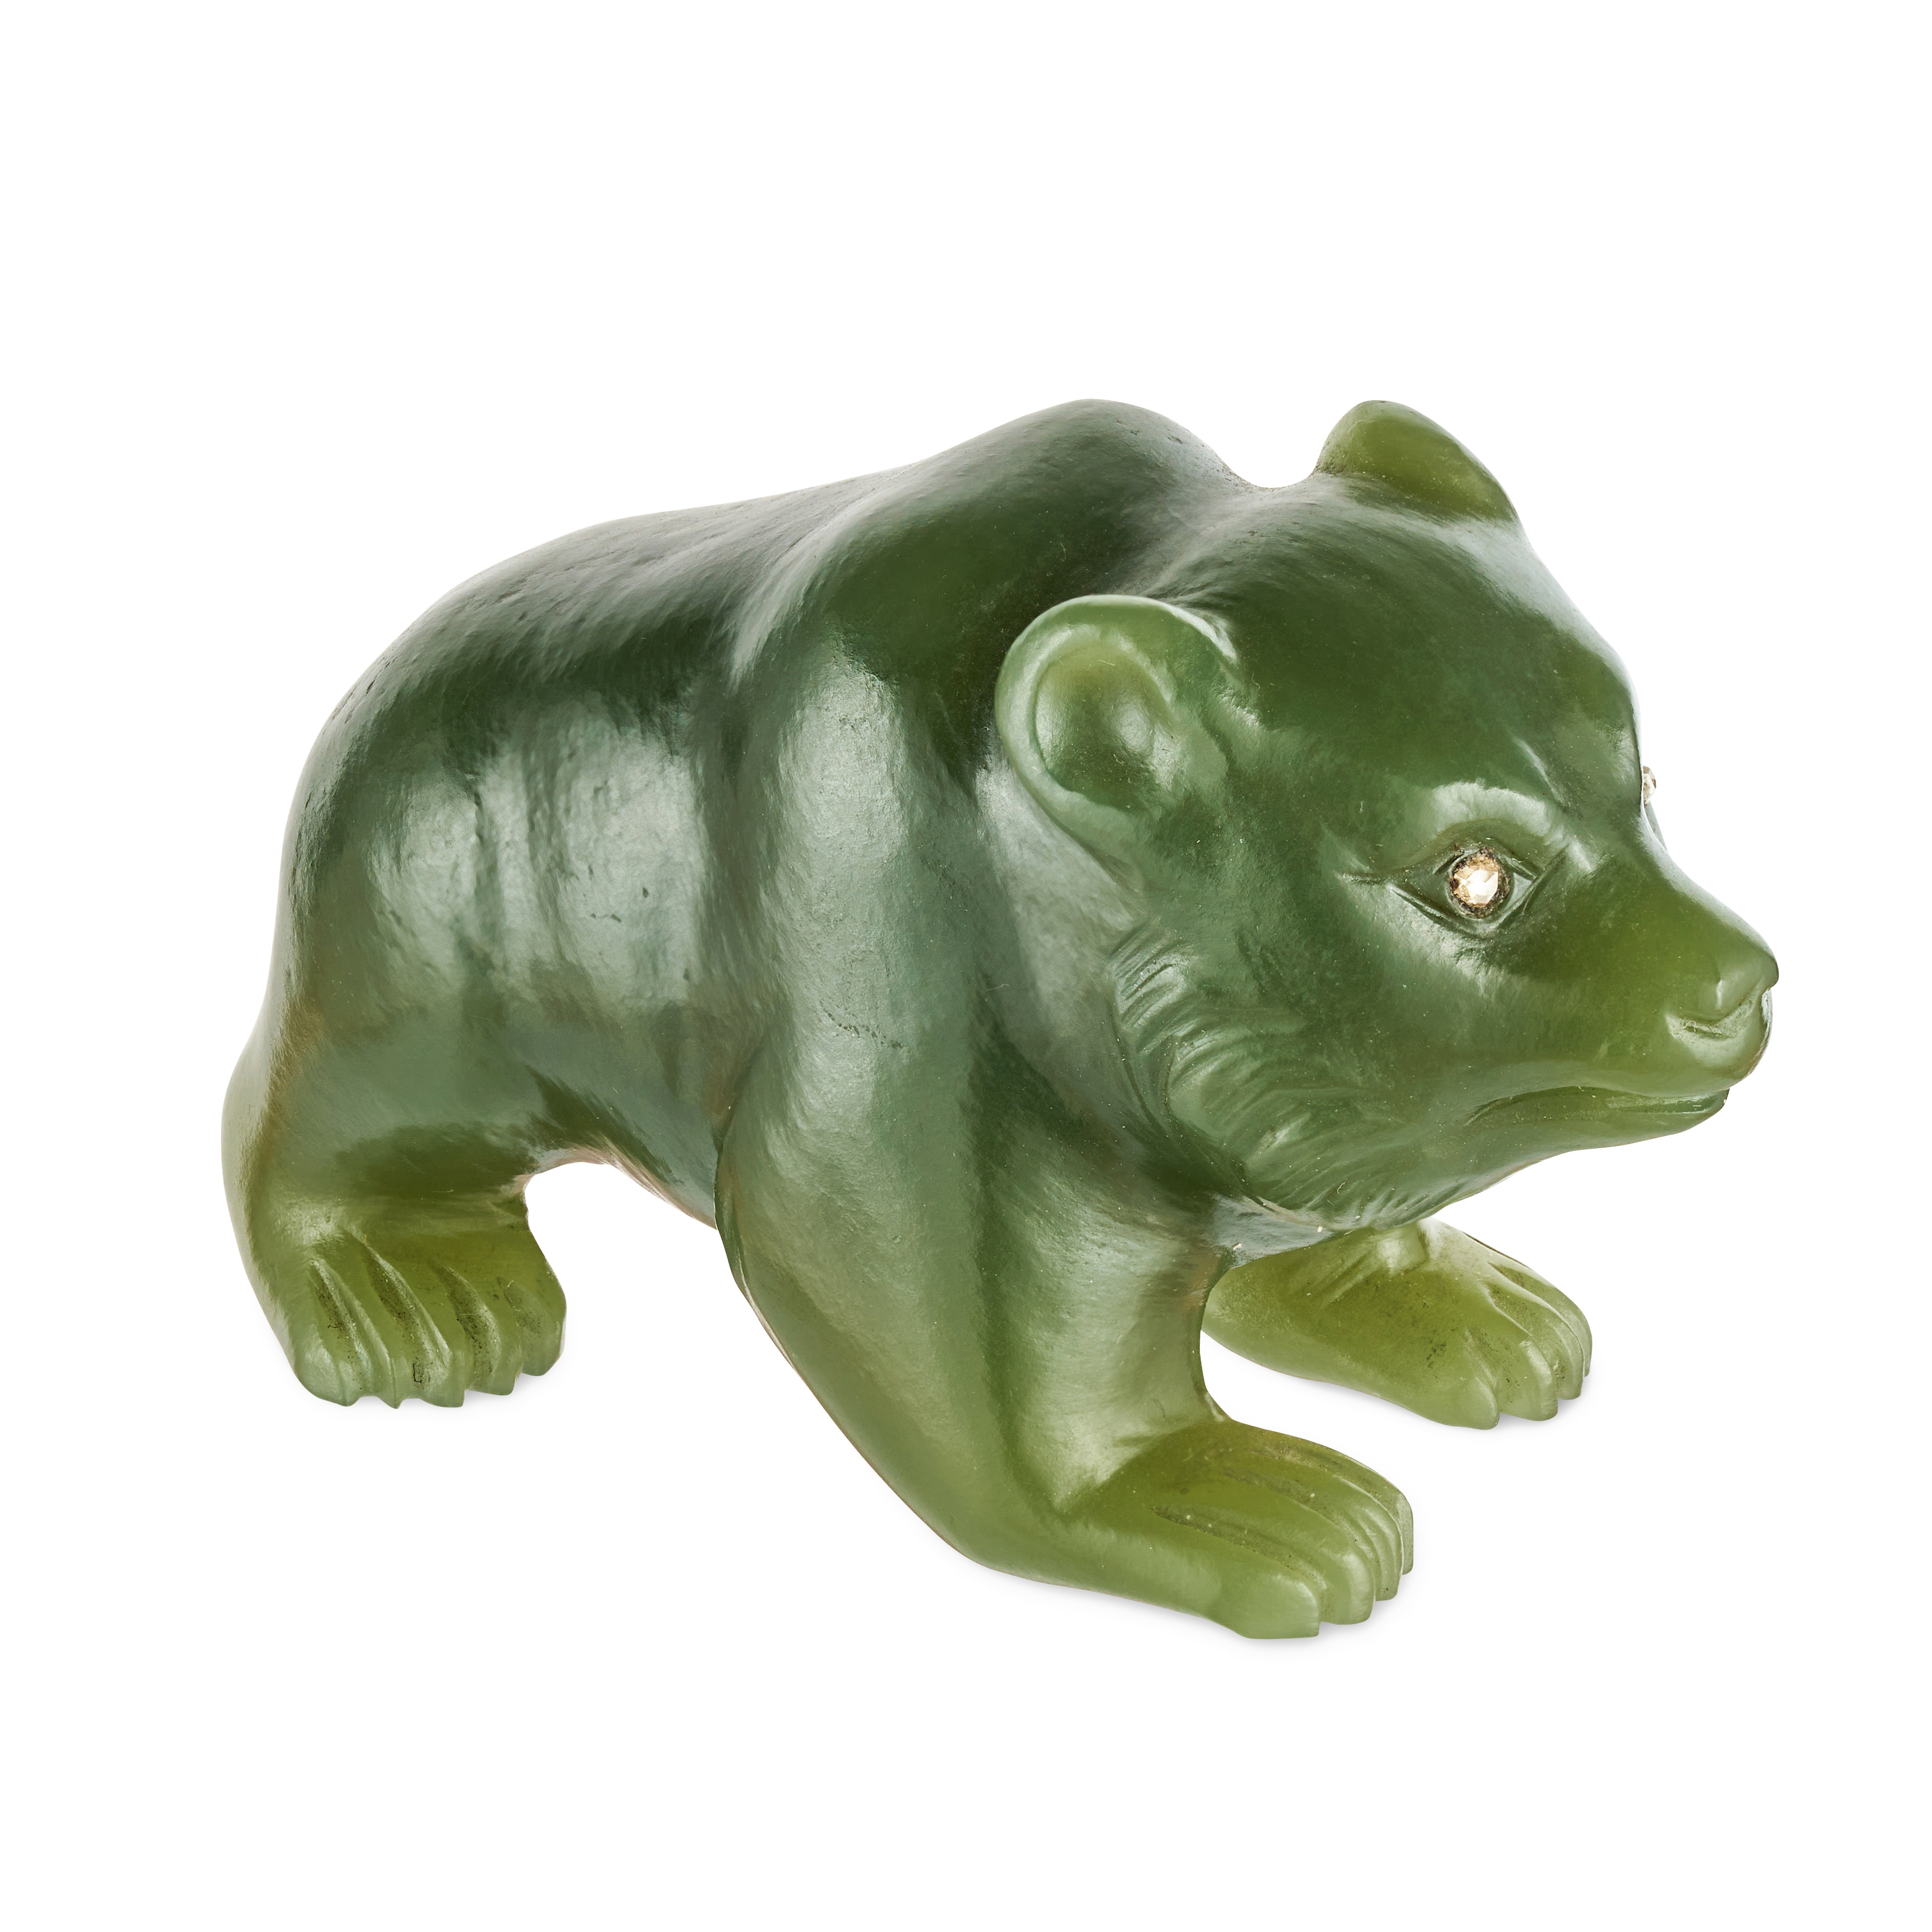 FABERGE, A JEWELLED NEPHRITE STUDY OF A BEAR, CIRCA 1905 - Image 4 of 6